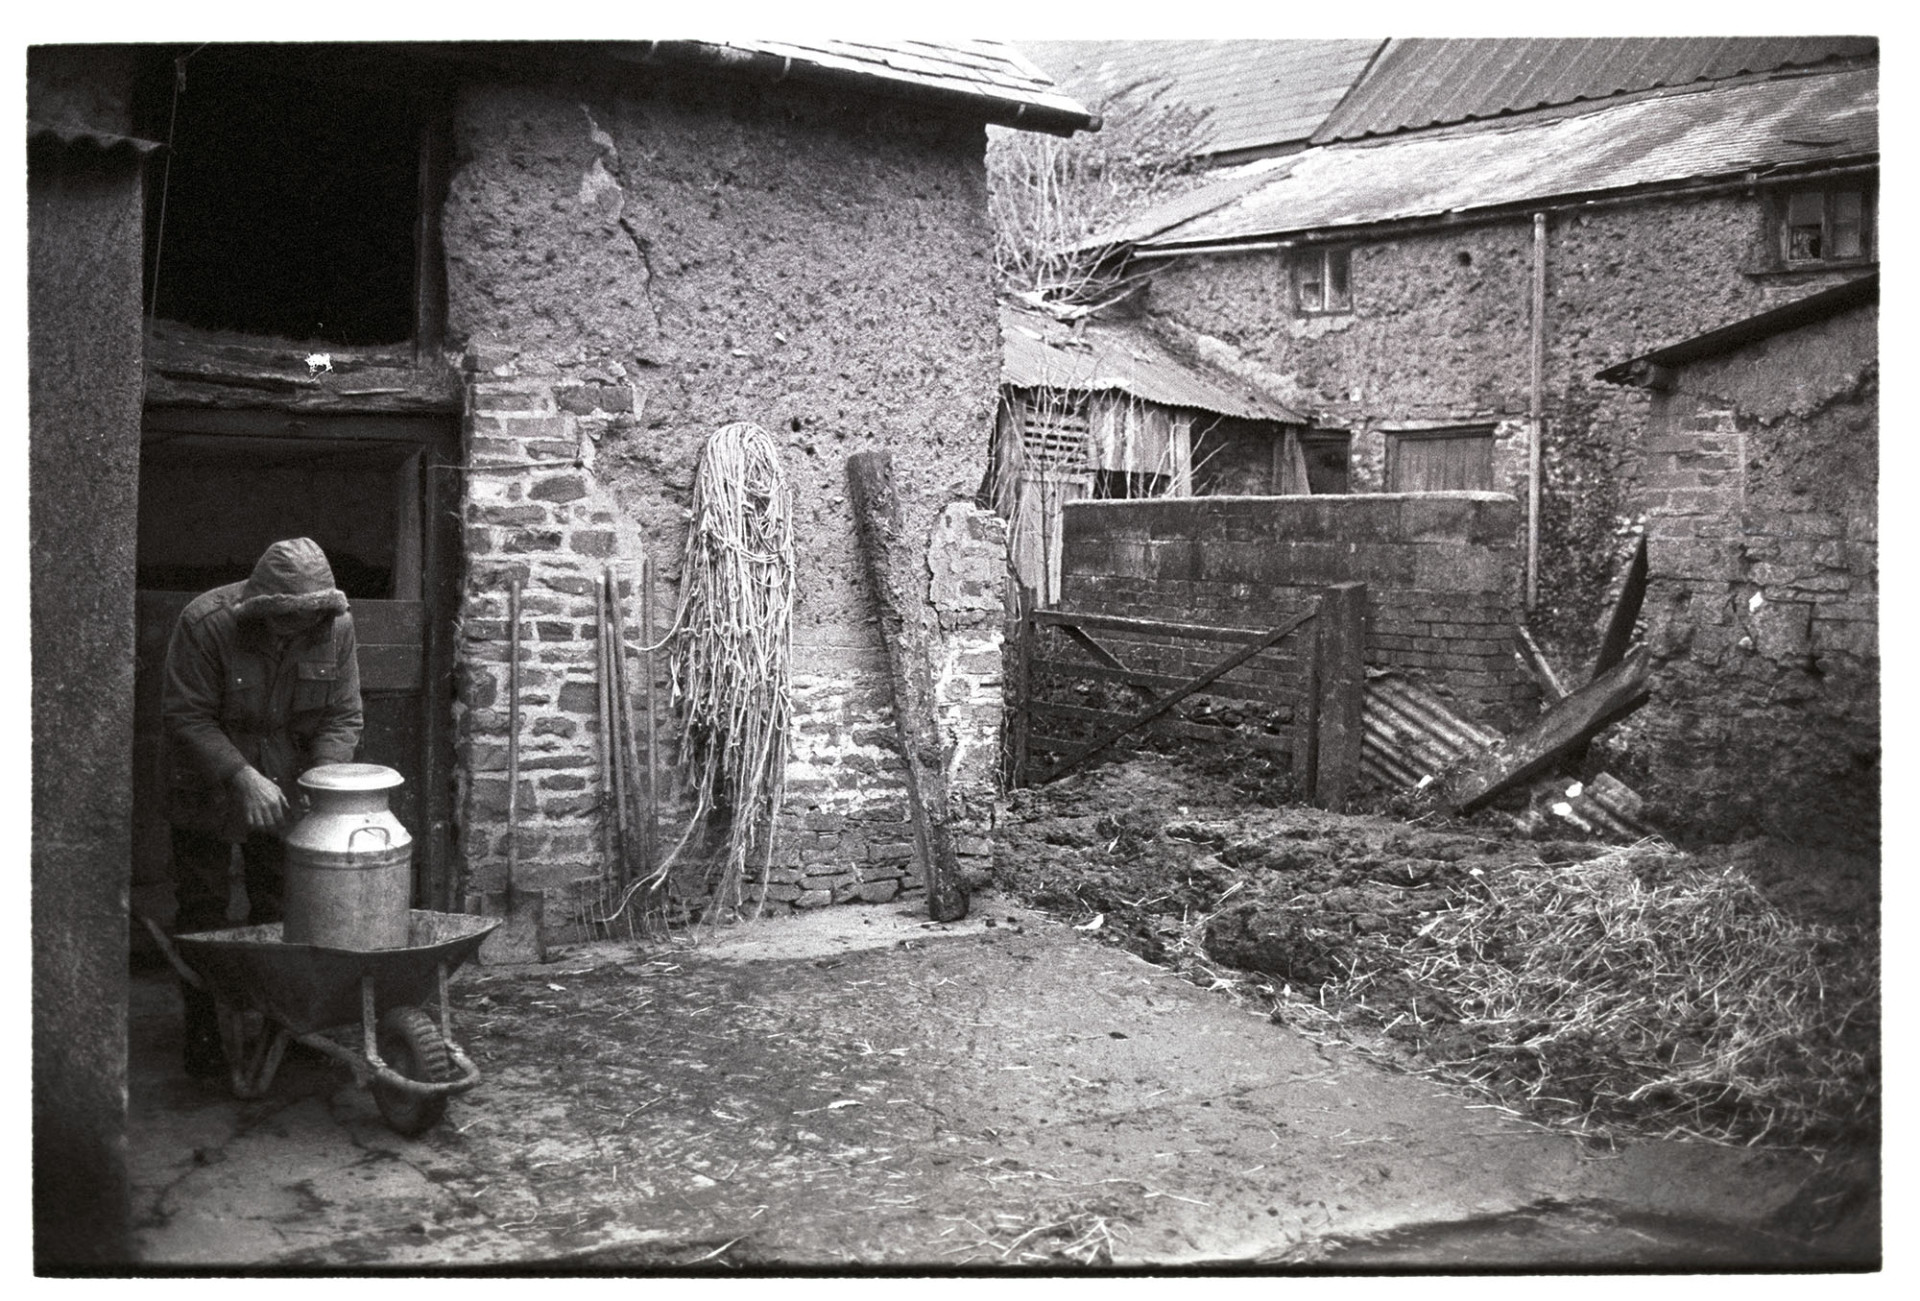 Farmer loading milk churn on wheelbarrow to take to stand in village.
[Jim Woolacott loading a milk churn into a wheelbarrow at Verdun, Atherington, to take to a milk churn stand in the village.  In the background the farmhouse and a cob and stone barn are visible.  Tools are leaning against the barn wall, and a coil of baler twine is hanging beside them.]